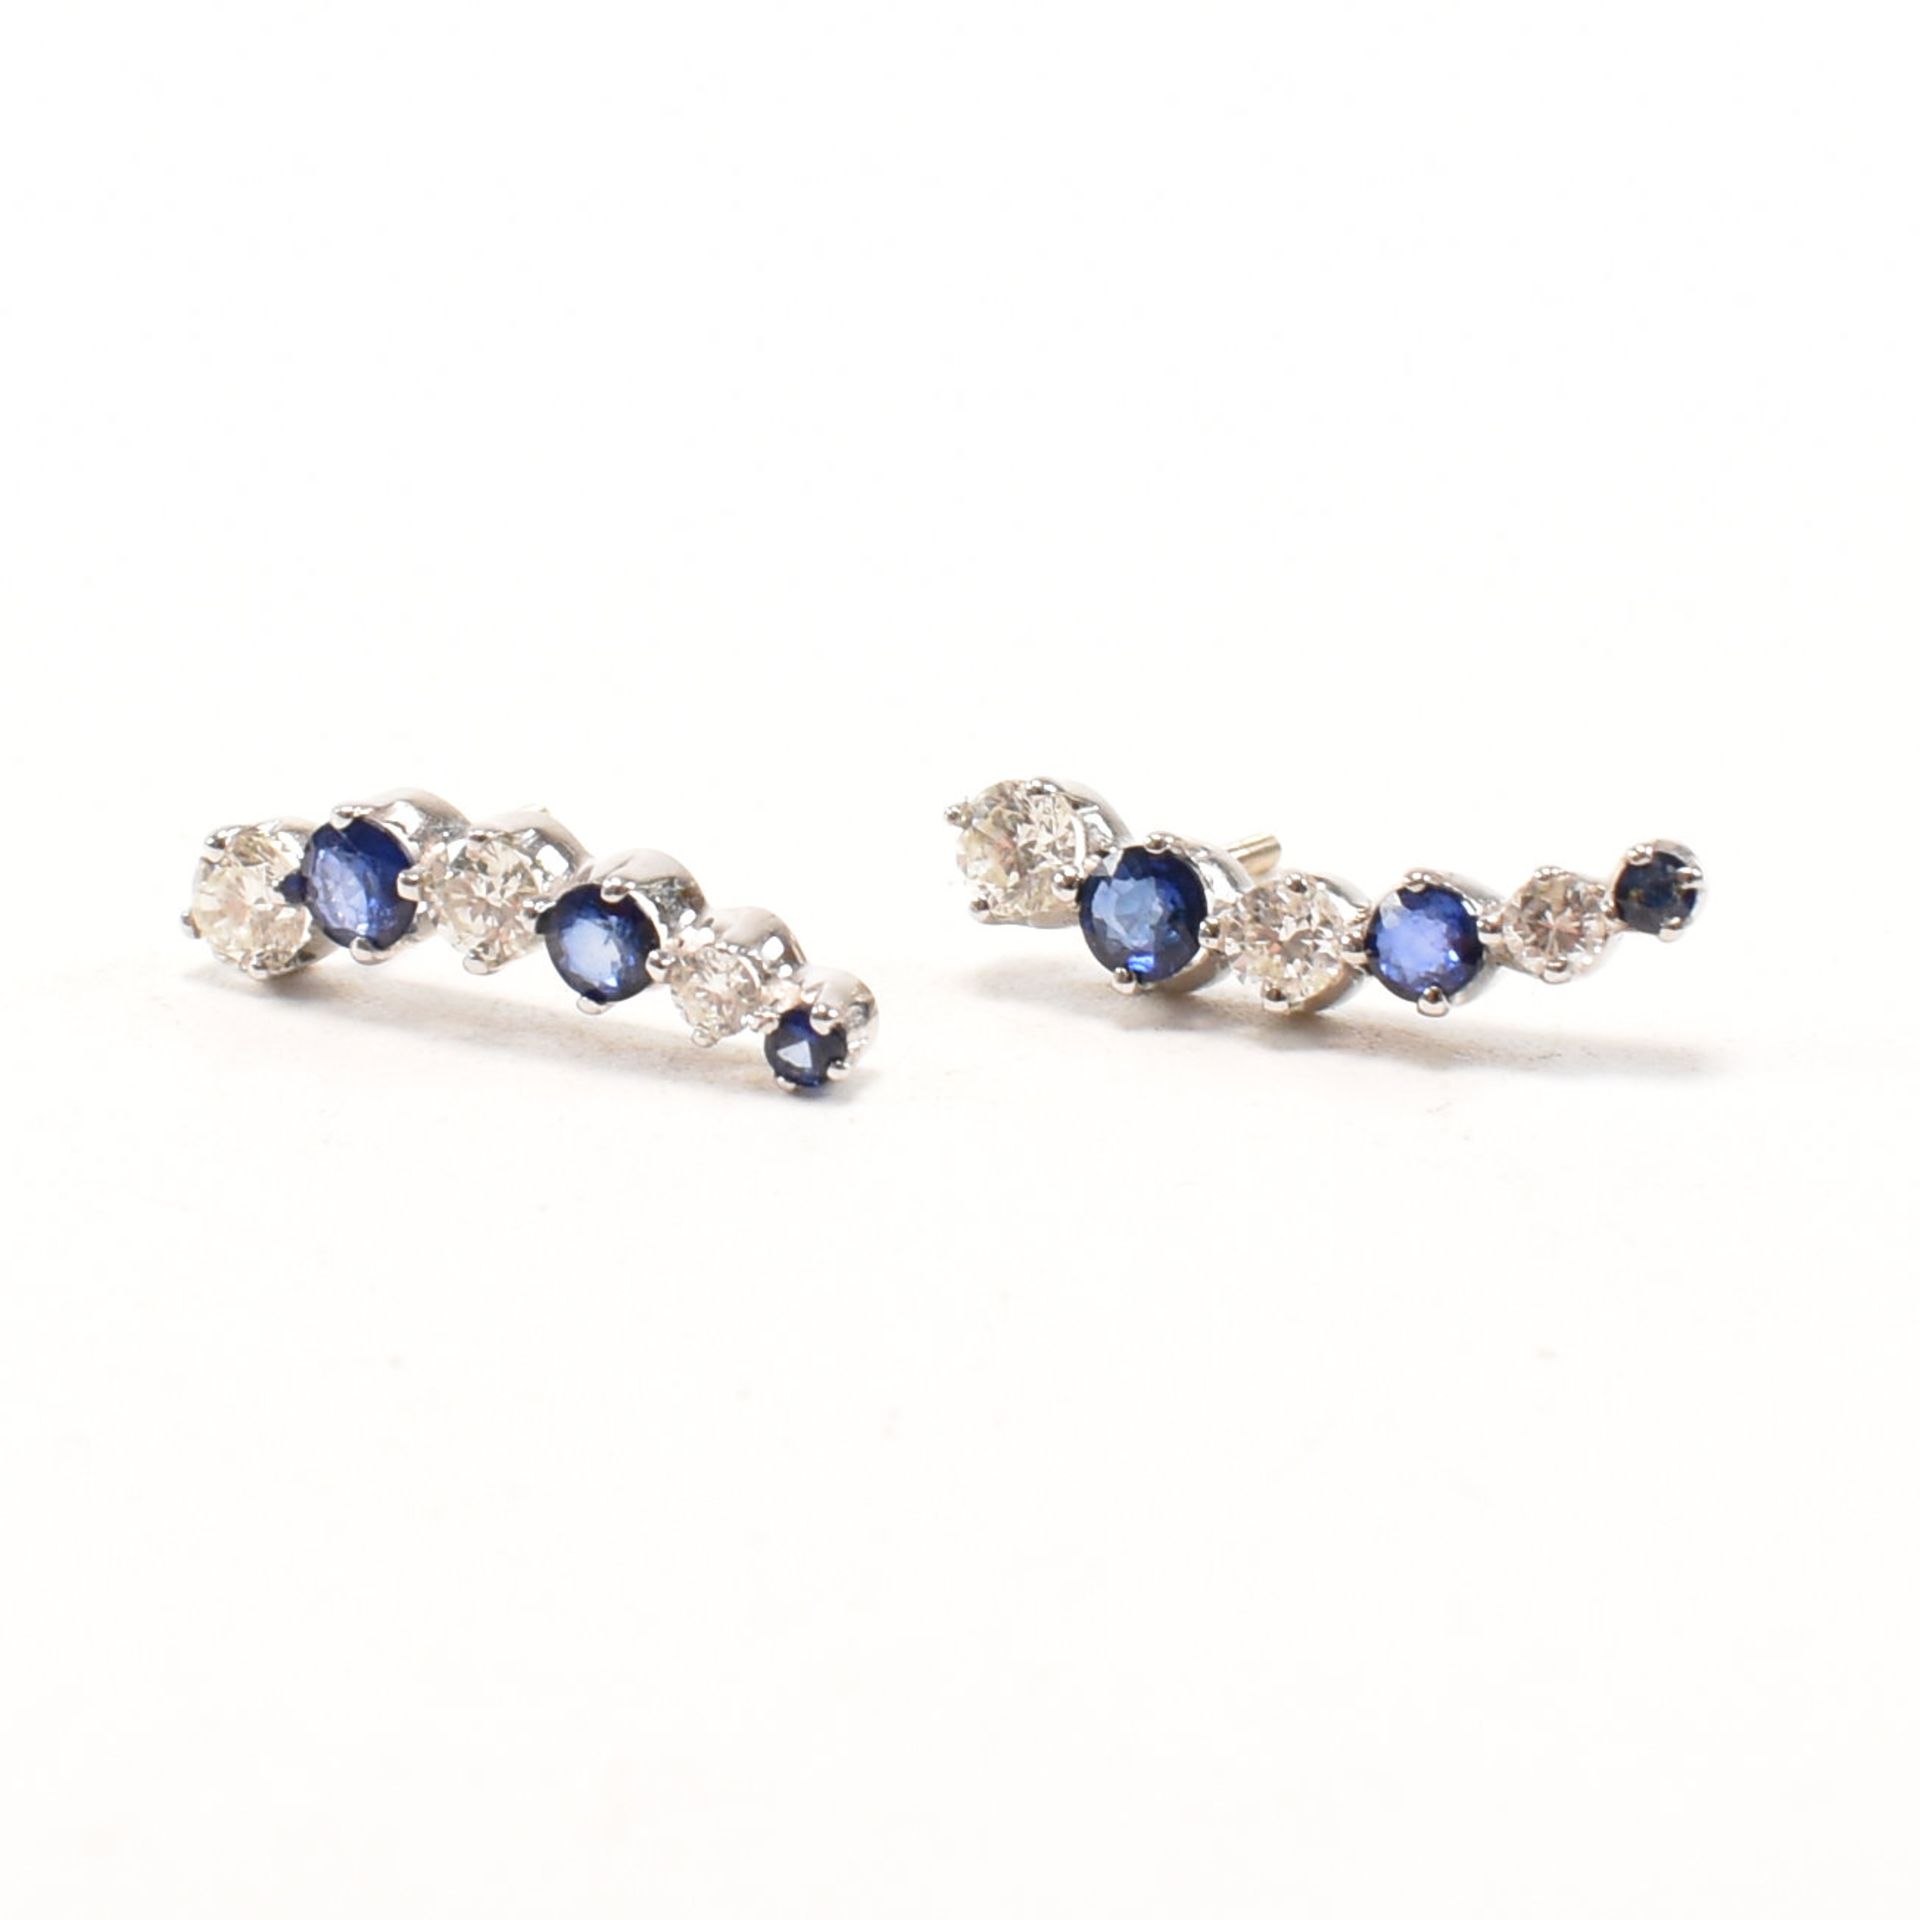 PAIR OF 14CT WHITE GOLD SAPPHIRE & DIAMOND EARRINGS - Image 5 of 8